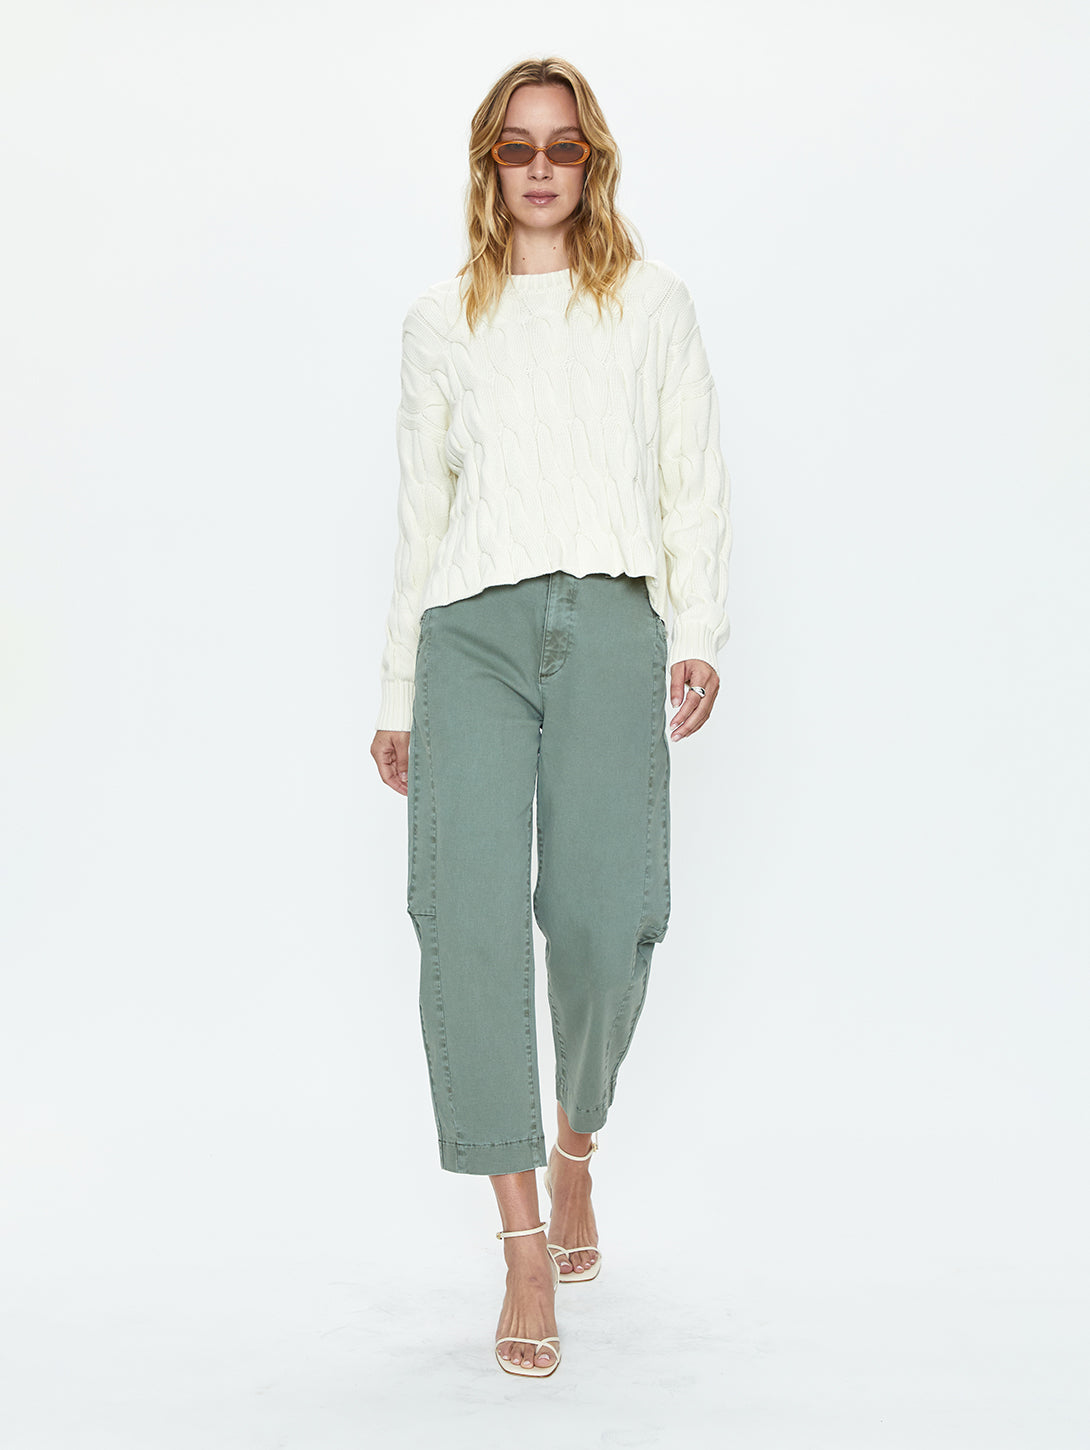 PISTOLA | Eli High Arched Pant - Calvary Green | Over The Rainbow ...